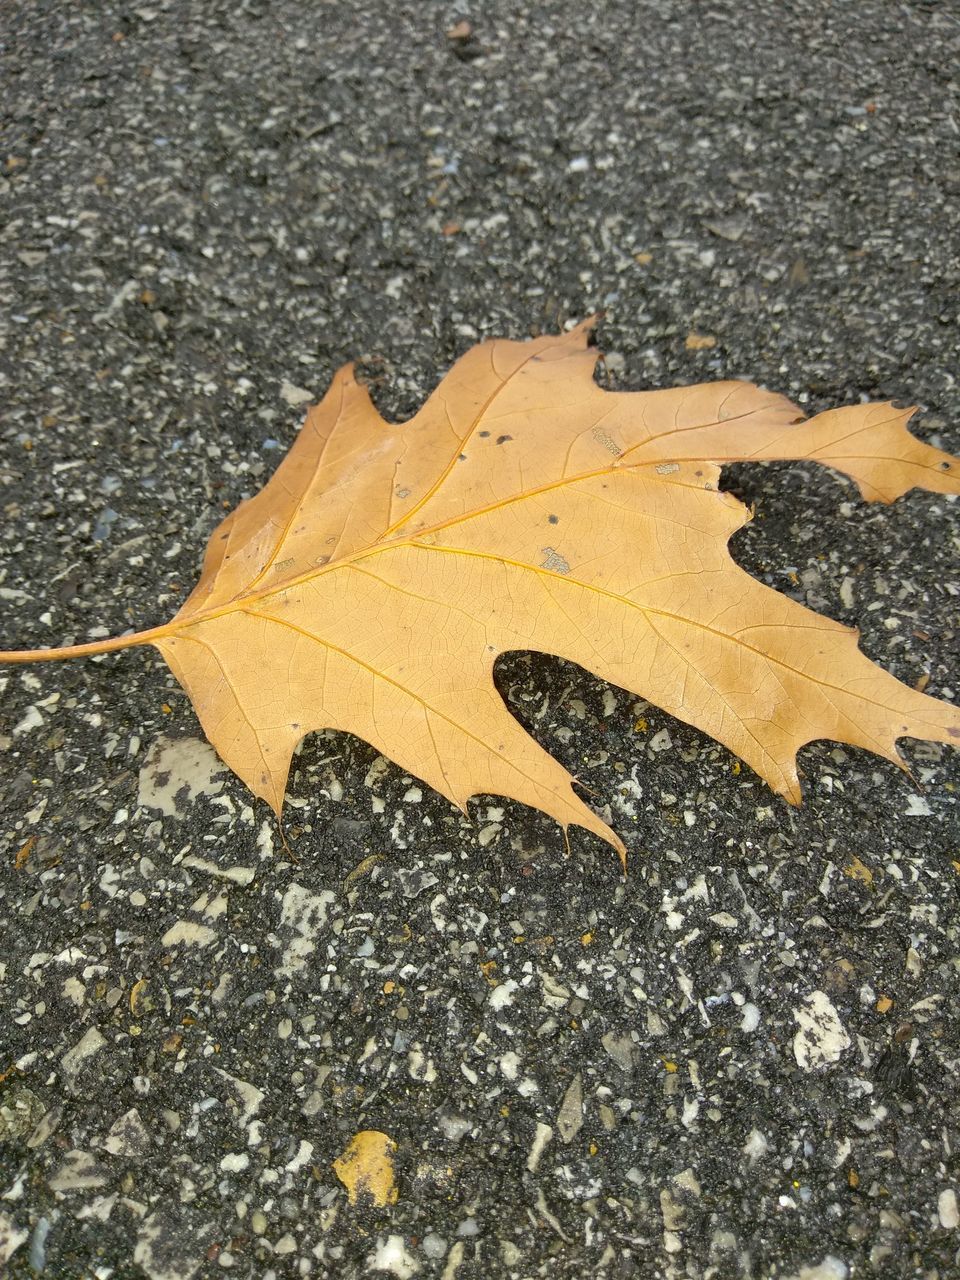 CLOSE-UP HIGH ANGLE VIEW OF YELLOW LEAF ON GROUND